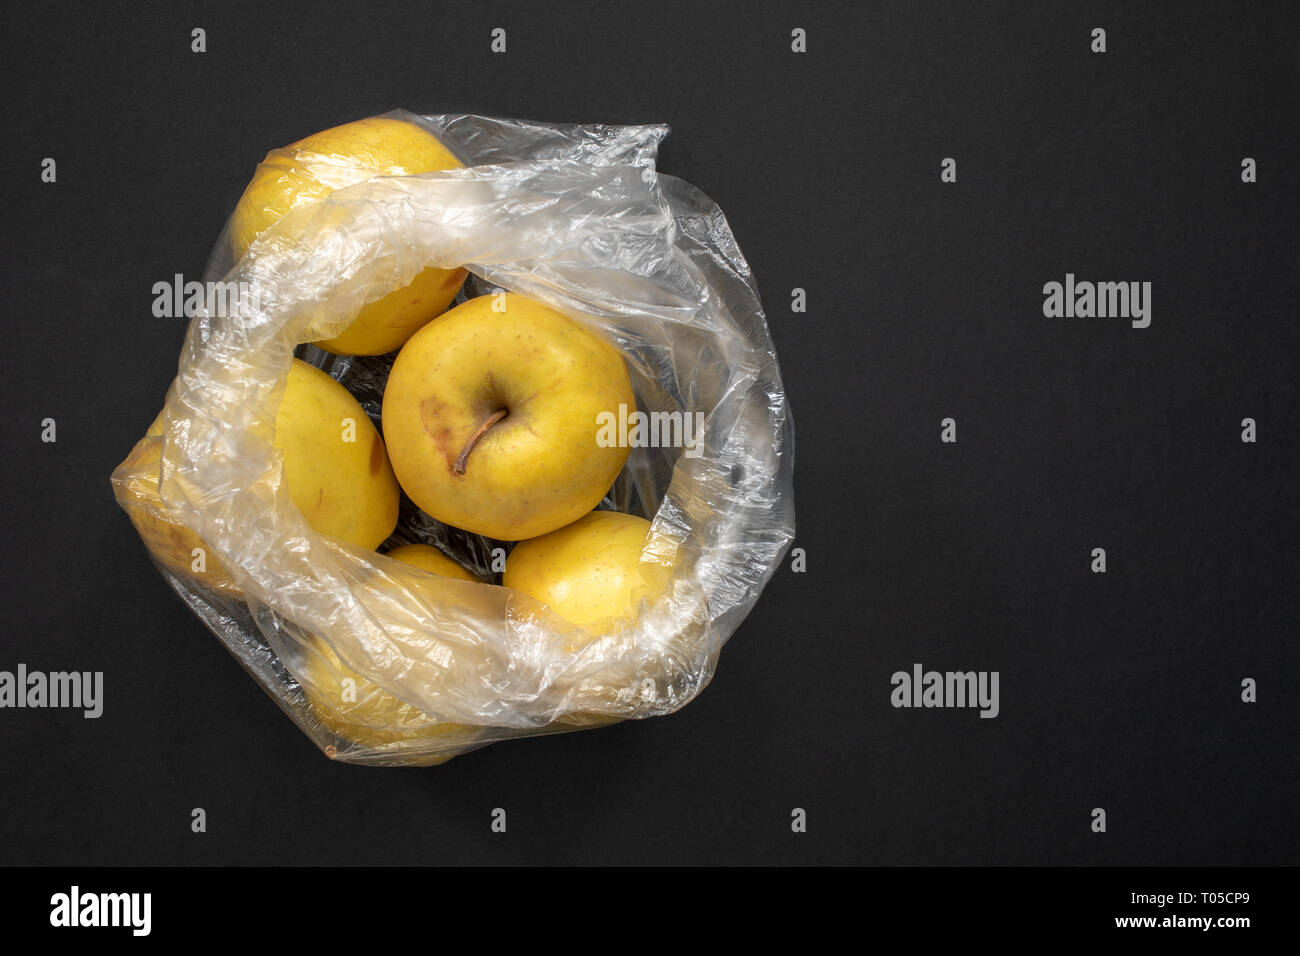 Download Yellow Ripe Apples In Opened Plastic Bag On Grey Background Stock Photo Alamy Yellowimages Mockups